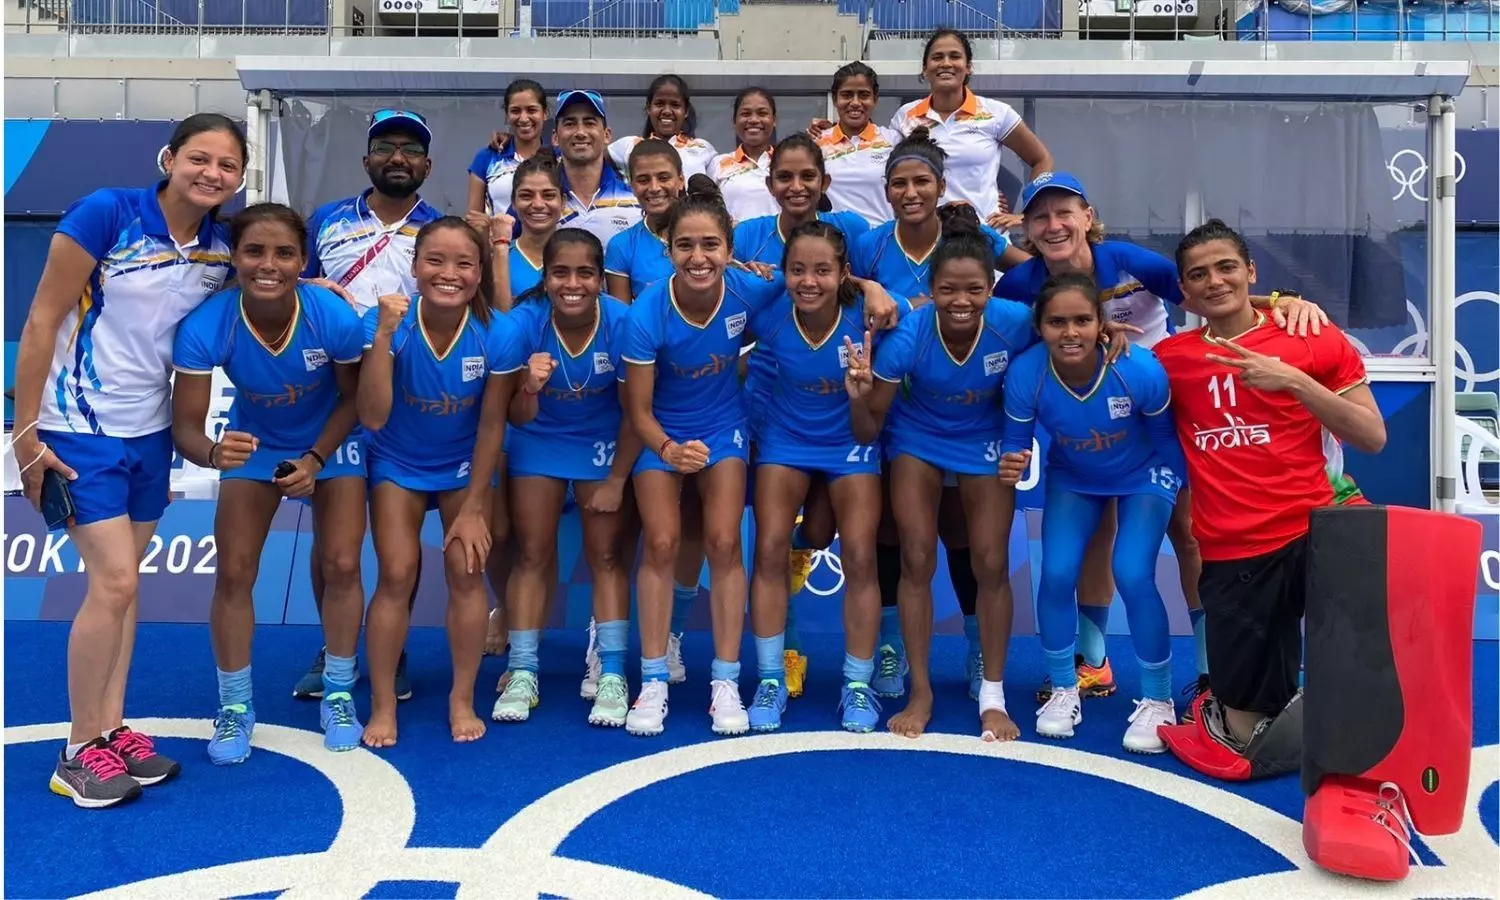 Tokyo Olympics Hockey LIVE Day 12 — India to play Great Britain for Bronze - Lose Semifinal 1-2